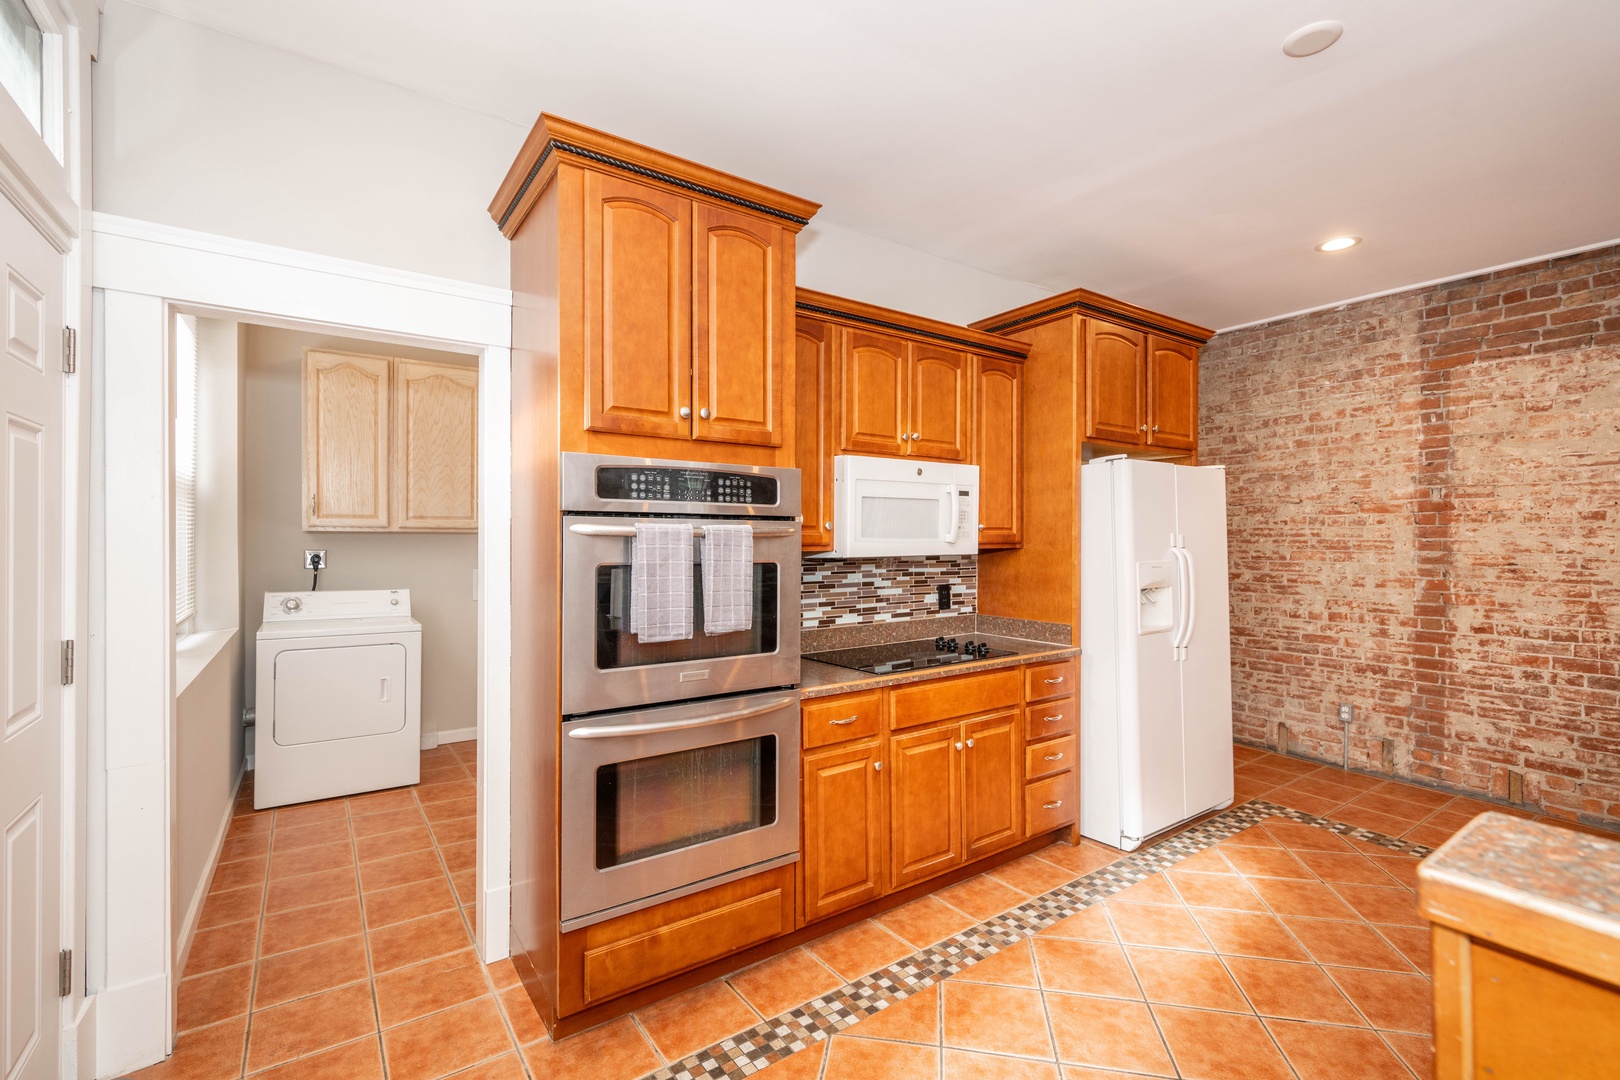 The kitchen showcases exposed brick, ample space, & numerous amenities